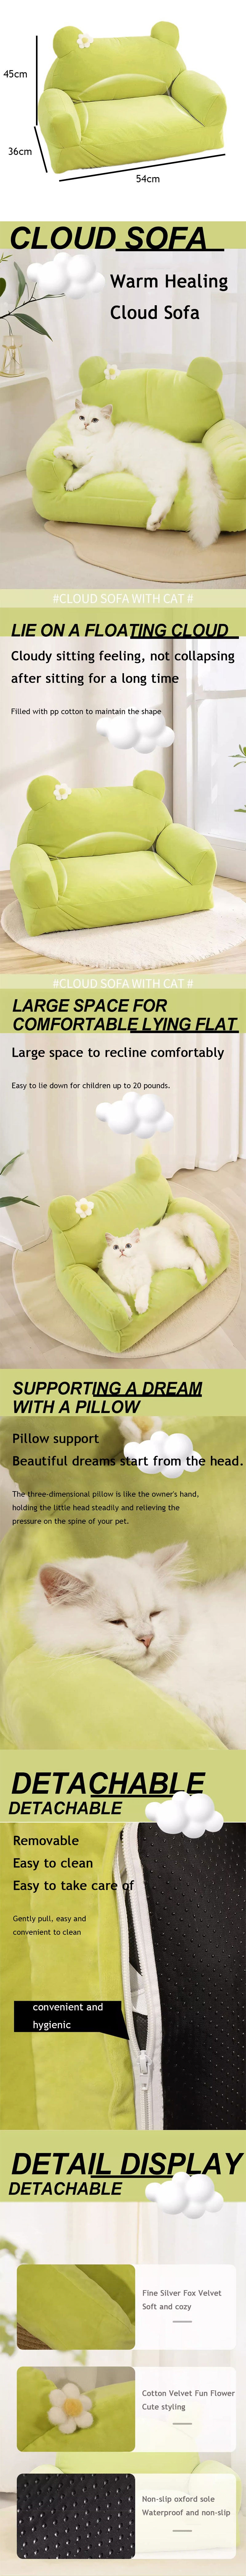 Cat Bed Non Stick Hair Removable 2 Color Cioud Sofa